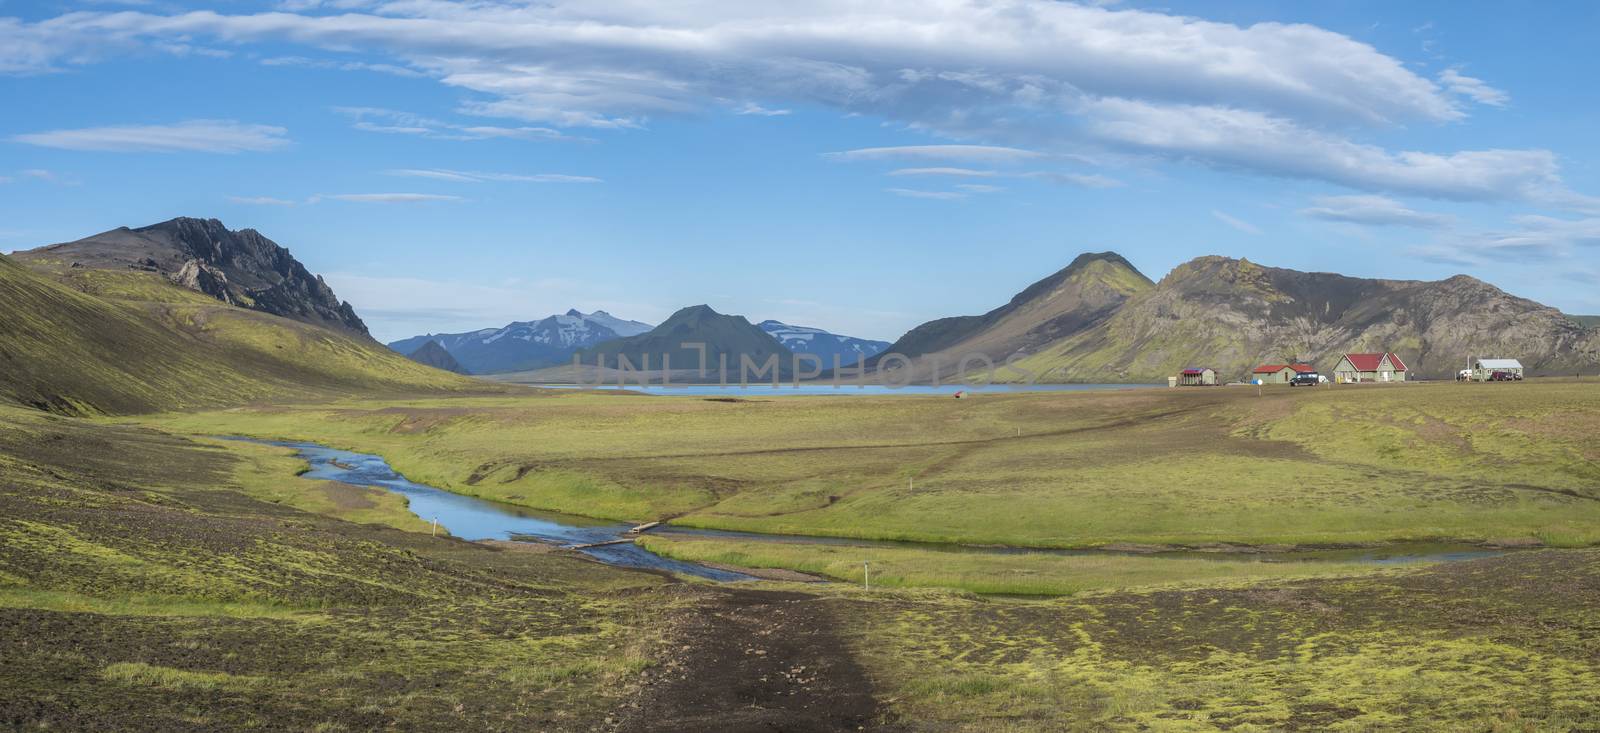 Panoramic landscape with mountain huts at camping site on blue Alftavatn lake with river, green hills and glacier in beautiful landscape of the Fjallabak Nature Reserve in the Highlands of Iceland part of Laugavegur hiking trail. by Henkeova